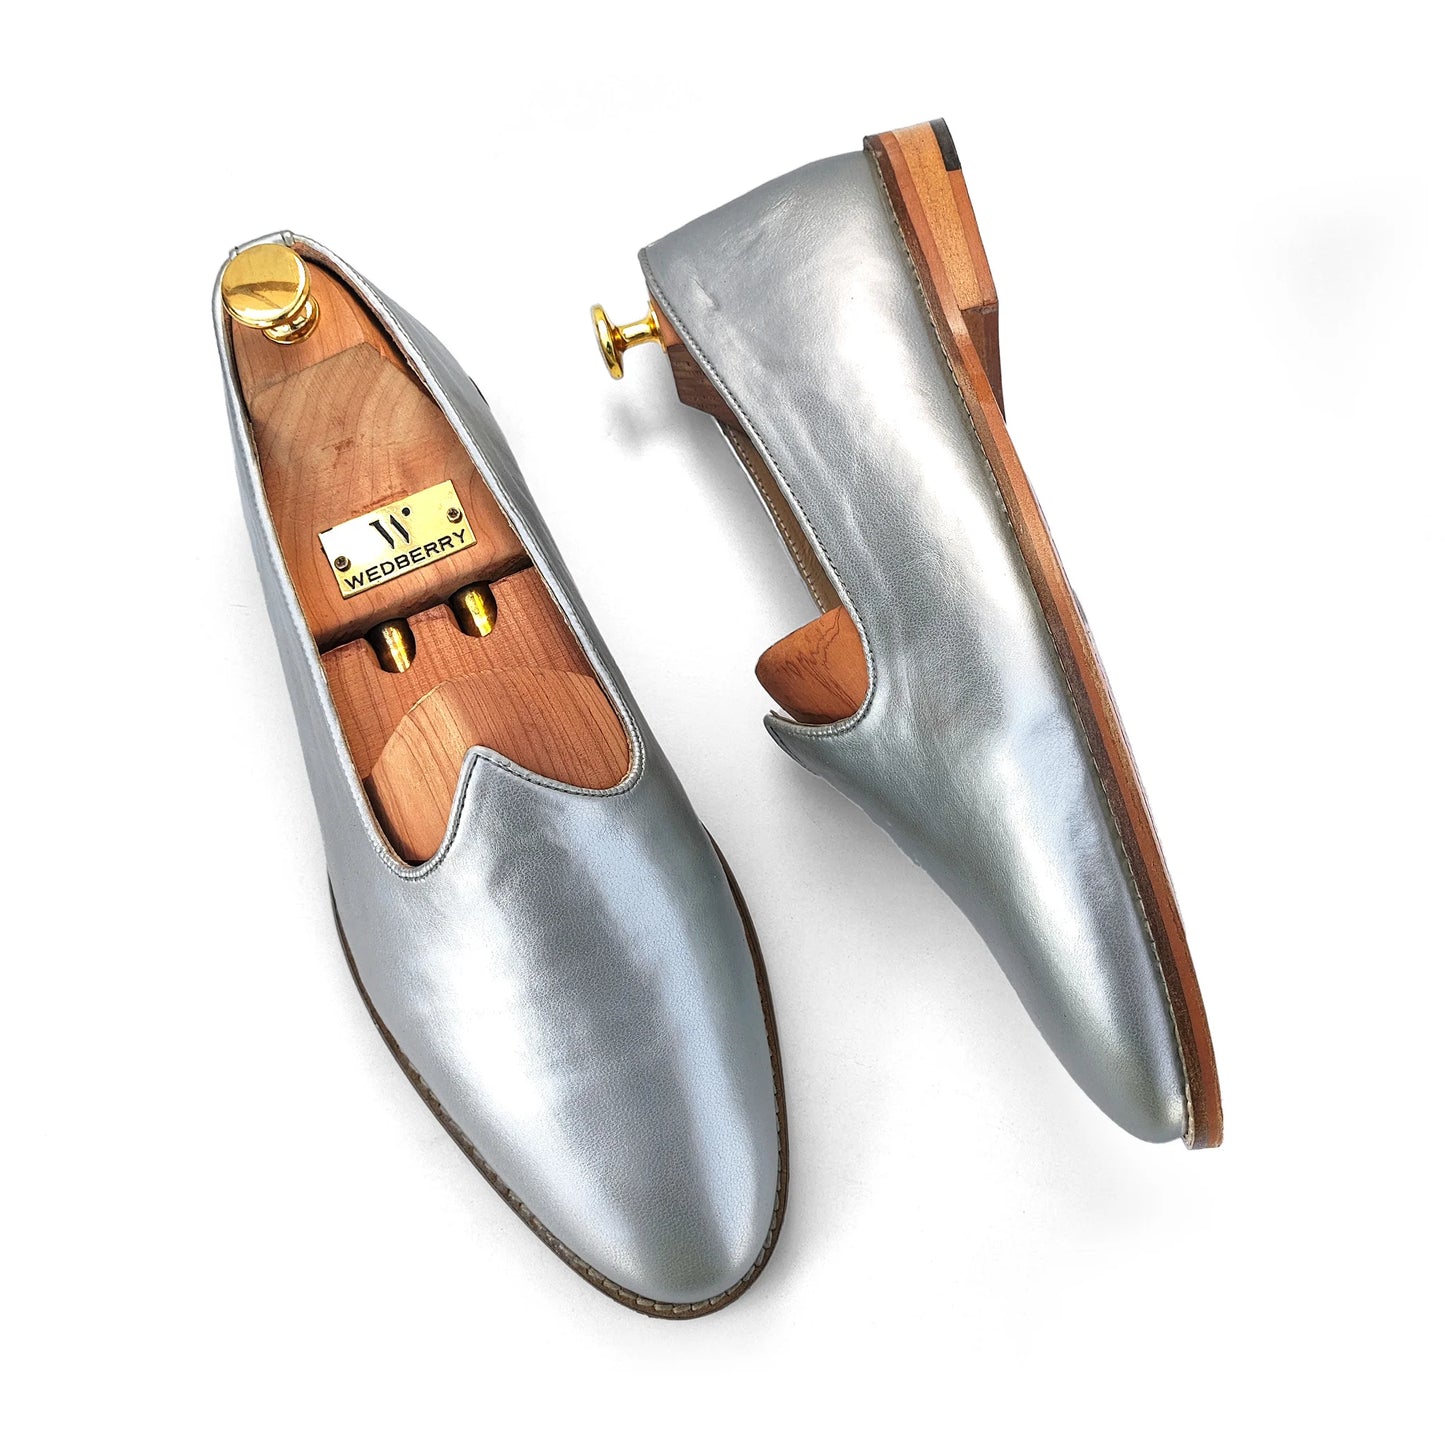 Silver Solid Wedding Shoes Ethnic Moajri Nagra Party Loafers for Men